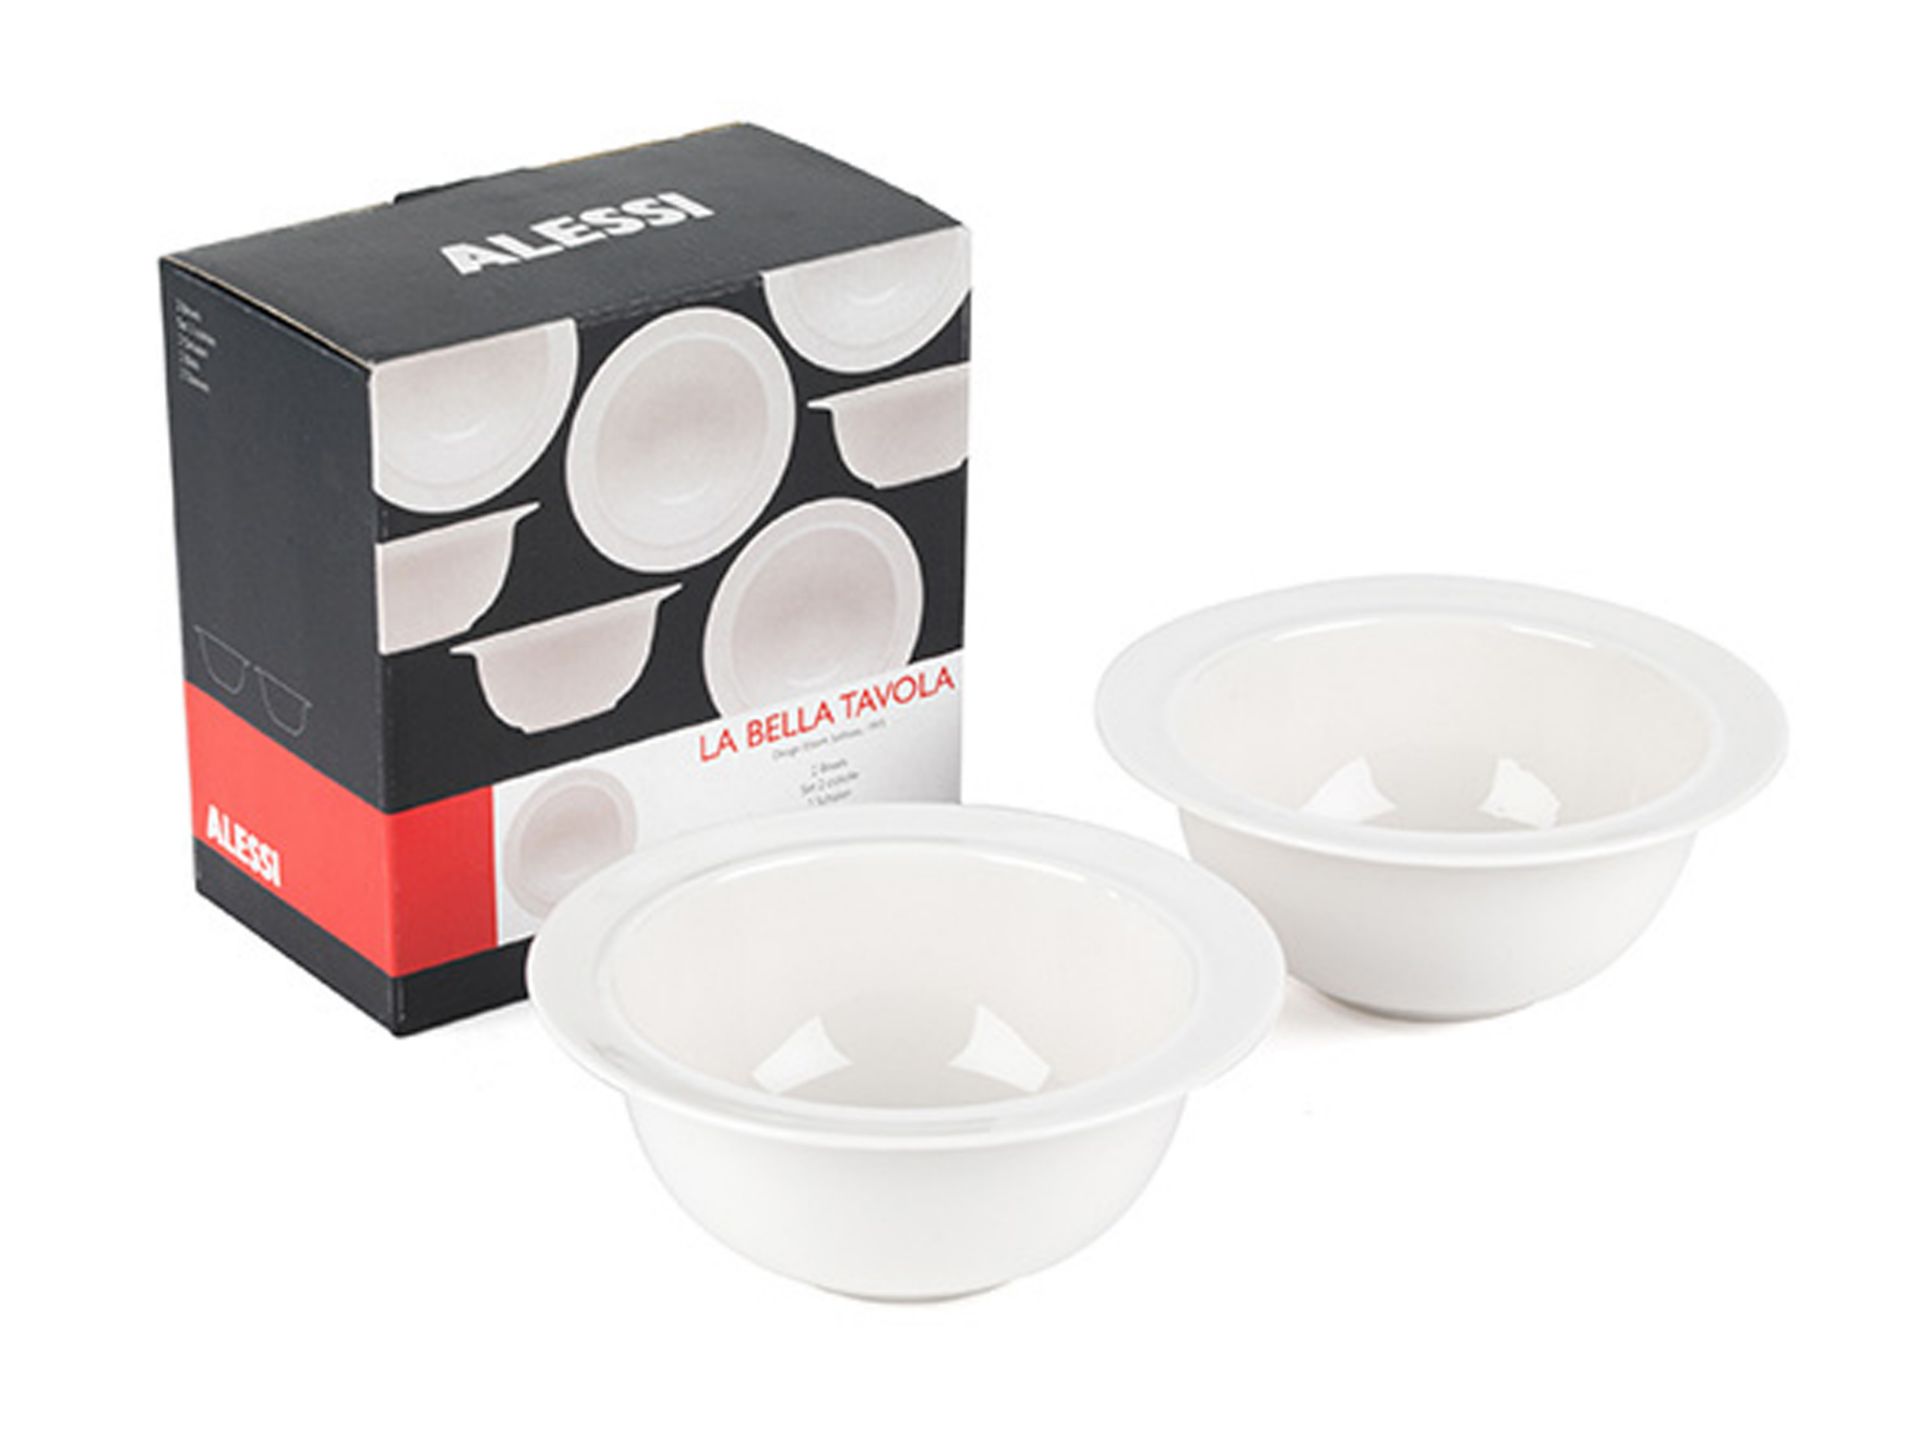 V Brand New Alessi La Bella Pack Of 2 Soup Bowls (23cm diameter) RRP £21.99 X 2 YOUR BID PRICE TO BE